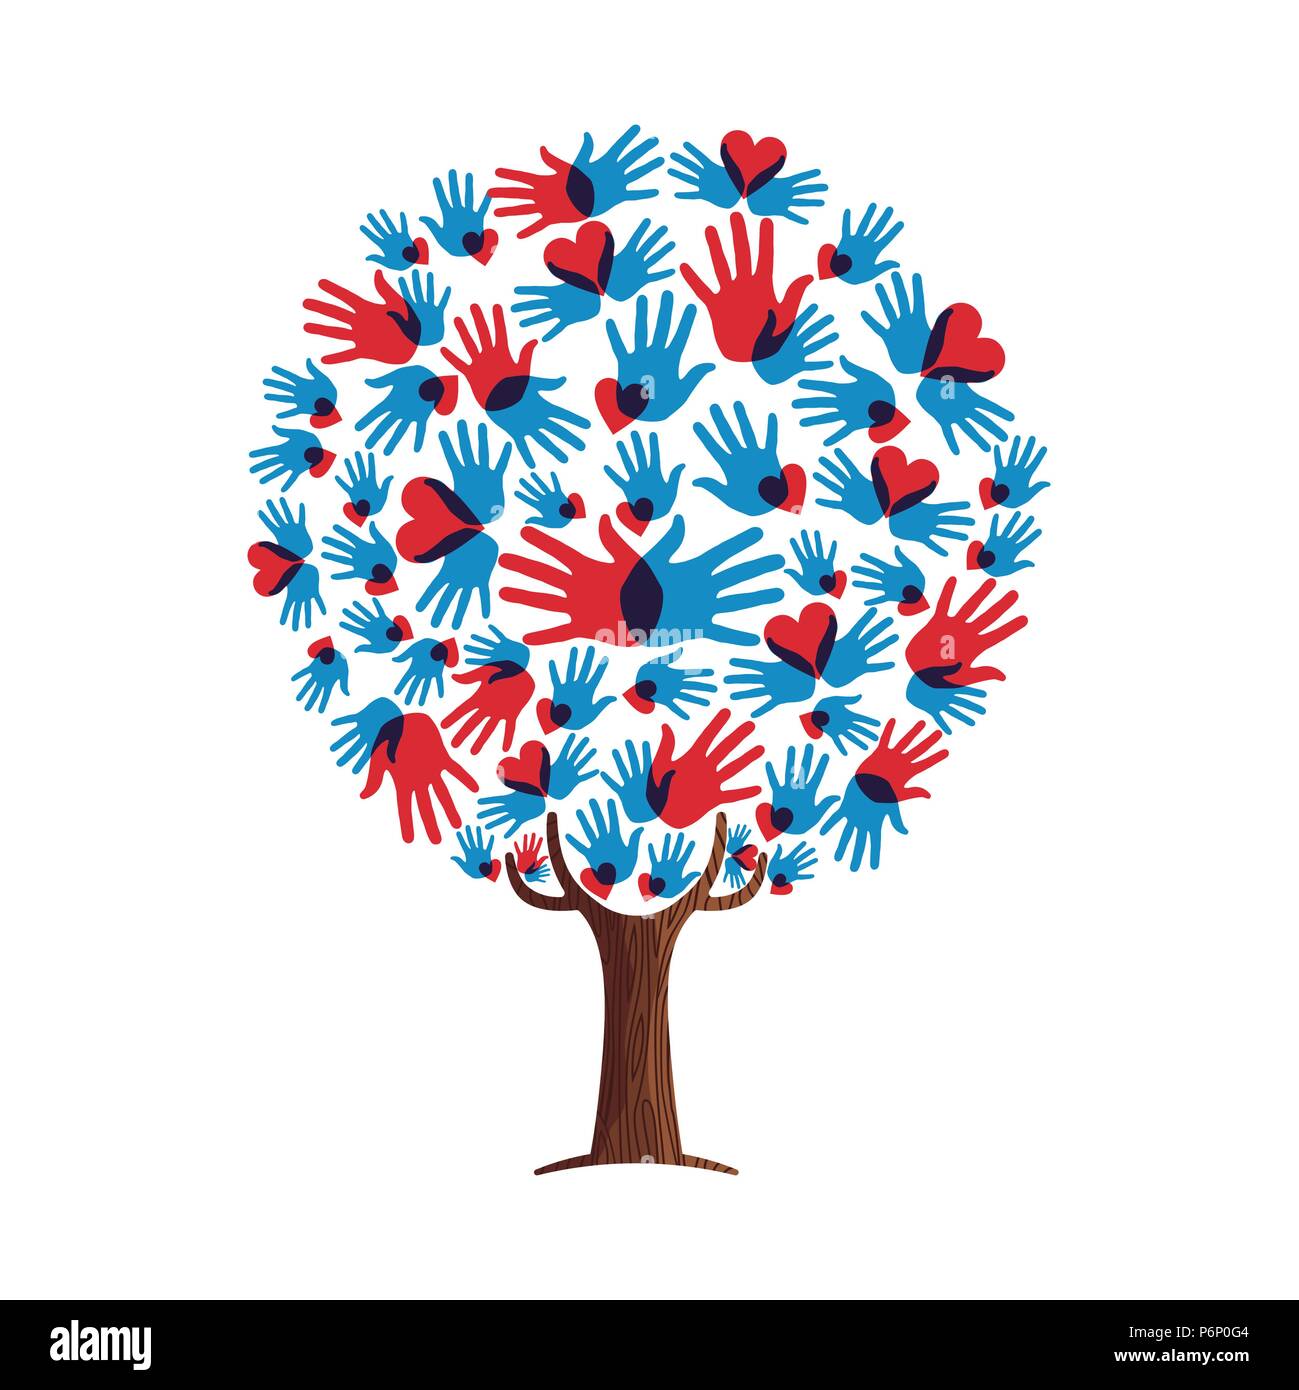 Tree made of colorful human hands in branches. Community help concept, diverse culture group or social project. EPS10 vector. Stock Vector